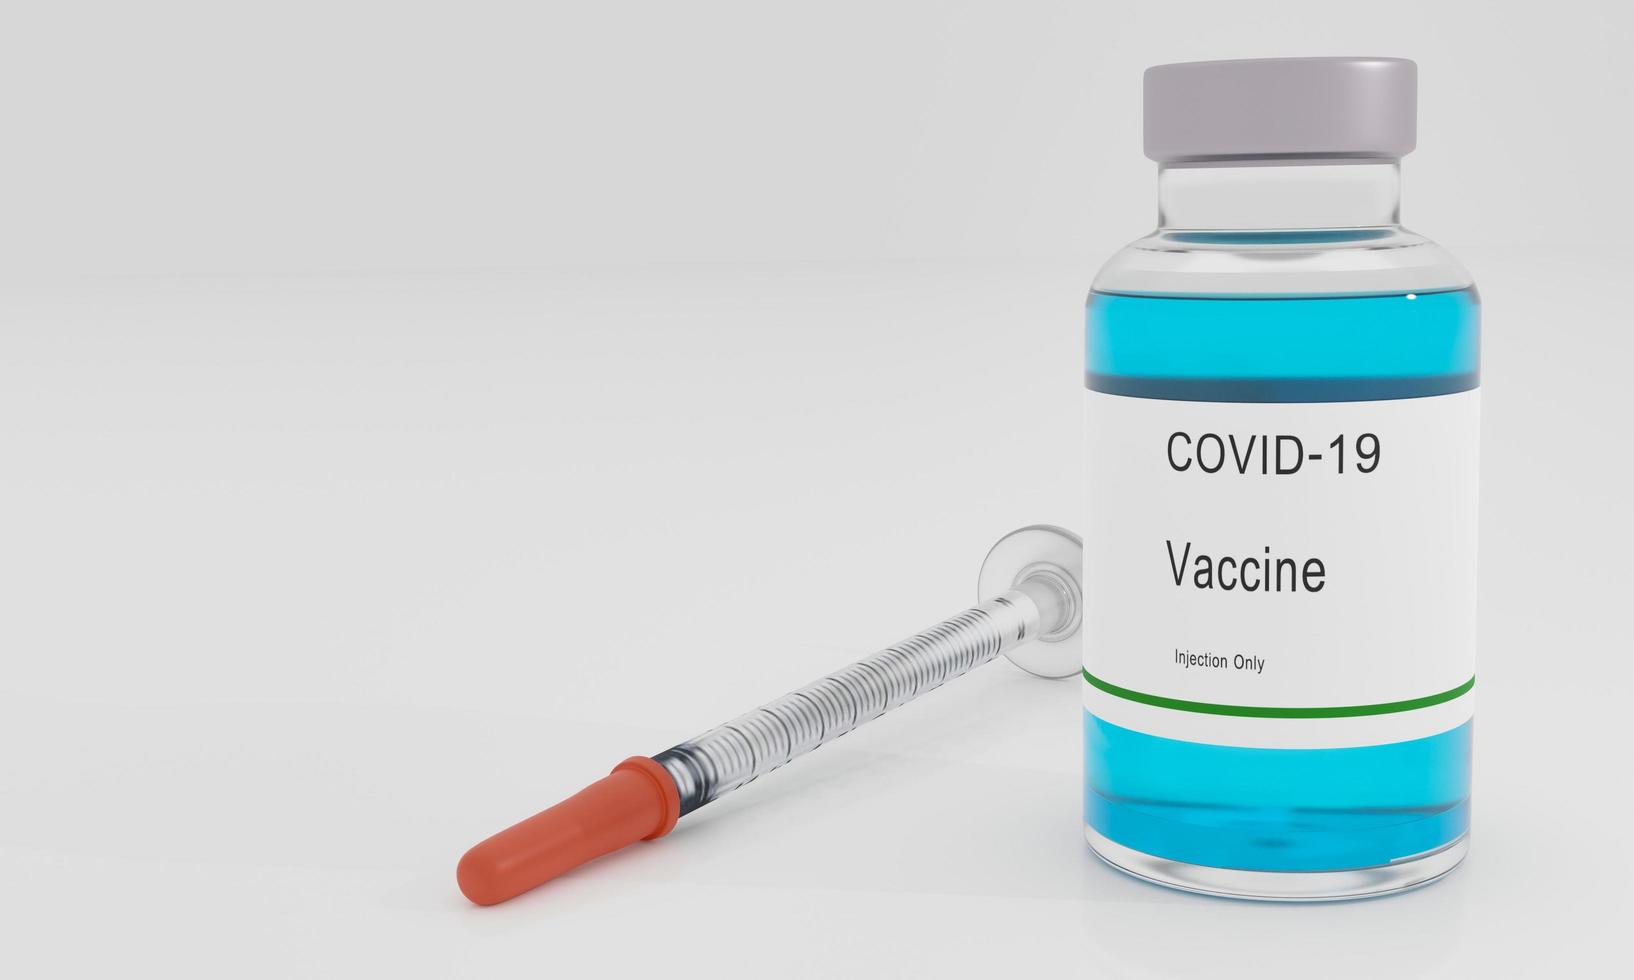 Covid-19 virus nCoV Concept. Virus vaccine for injection with syringe. Medicine bottle for injection. Medical glass vials and syringe for vaccination. 3D Rendering. photo